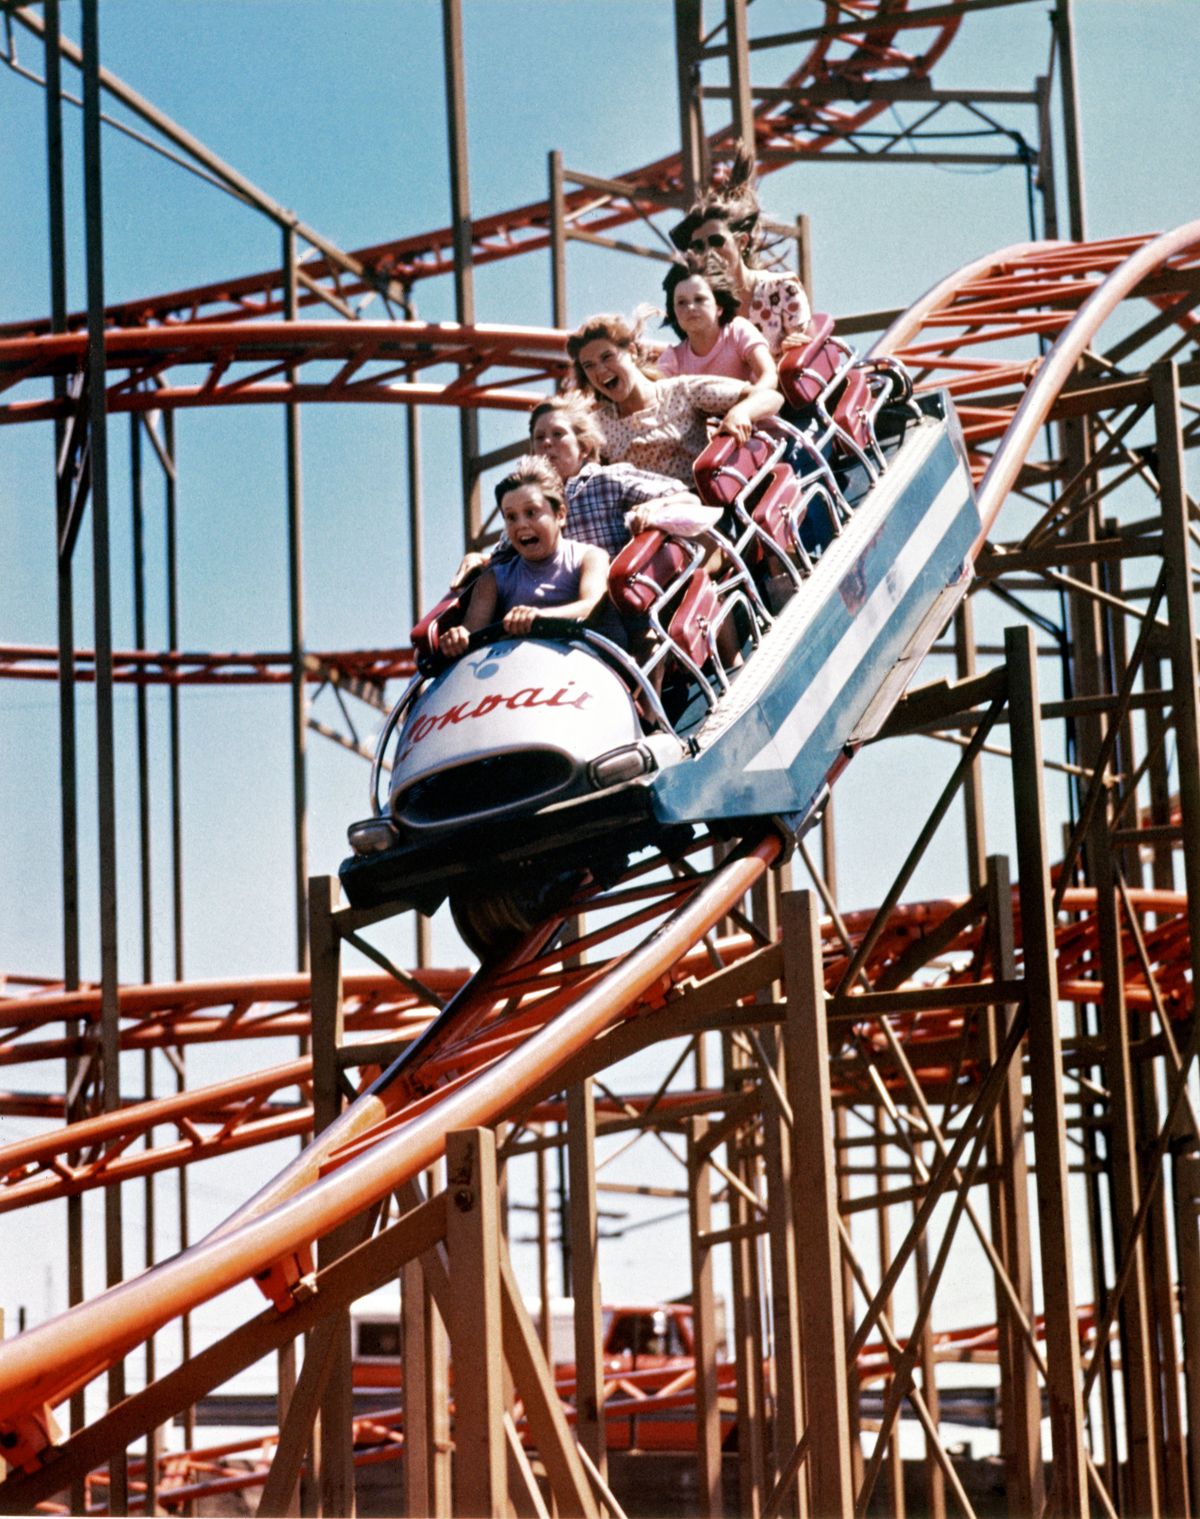 A roller coaster at Expo ’74.  (PHOTO ARCHIVE)